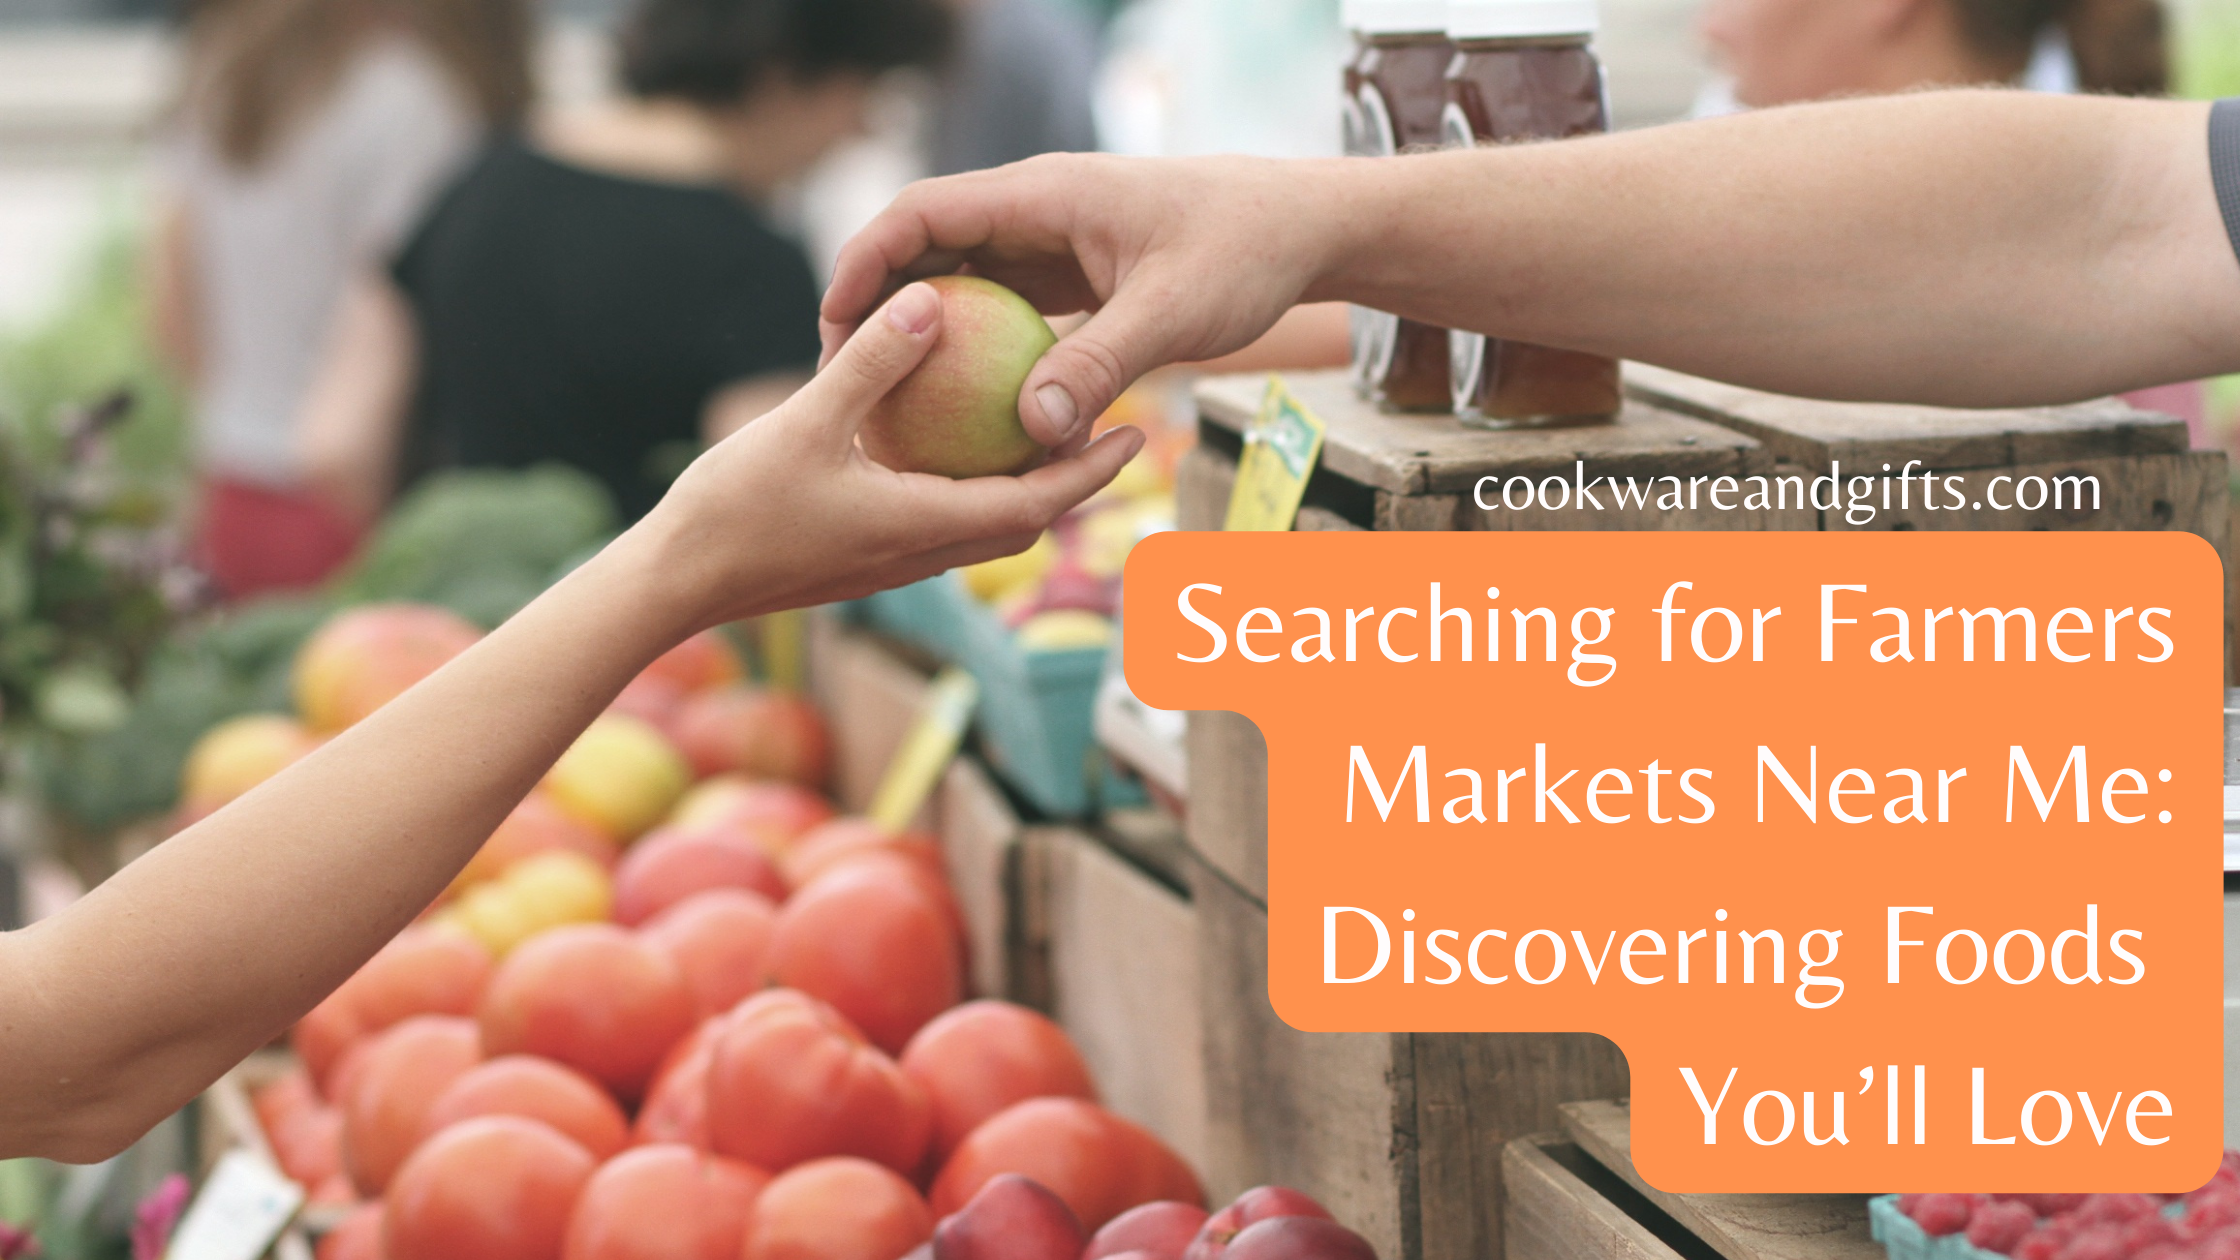 Searching for Farmers Markets Near Me: Discovering Local Foods You’ll Love